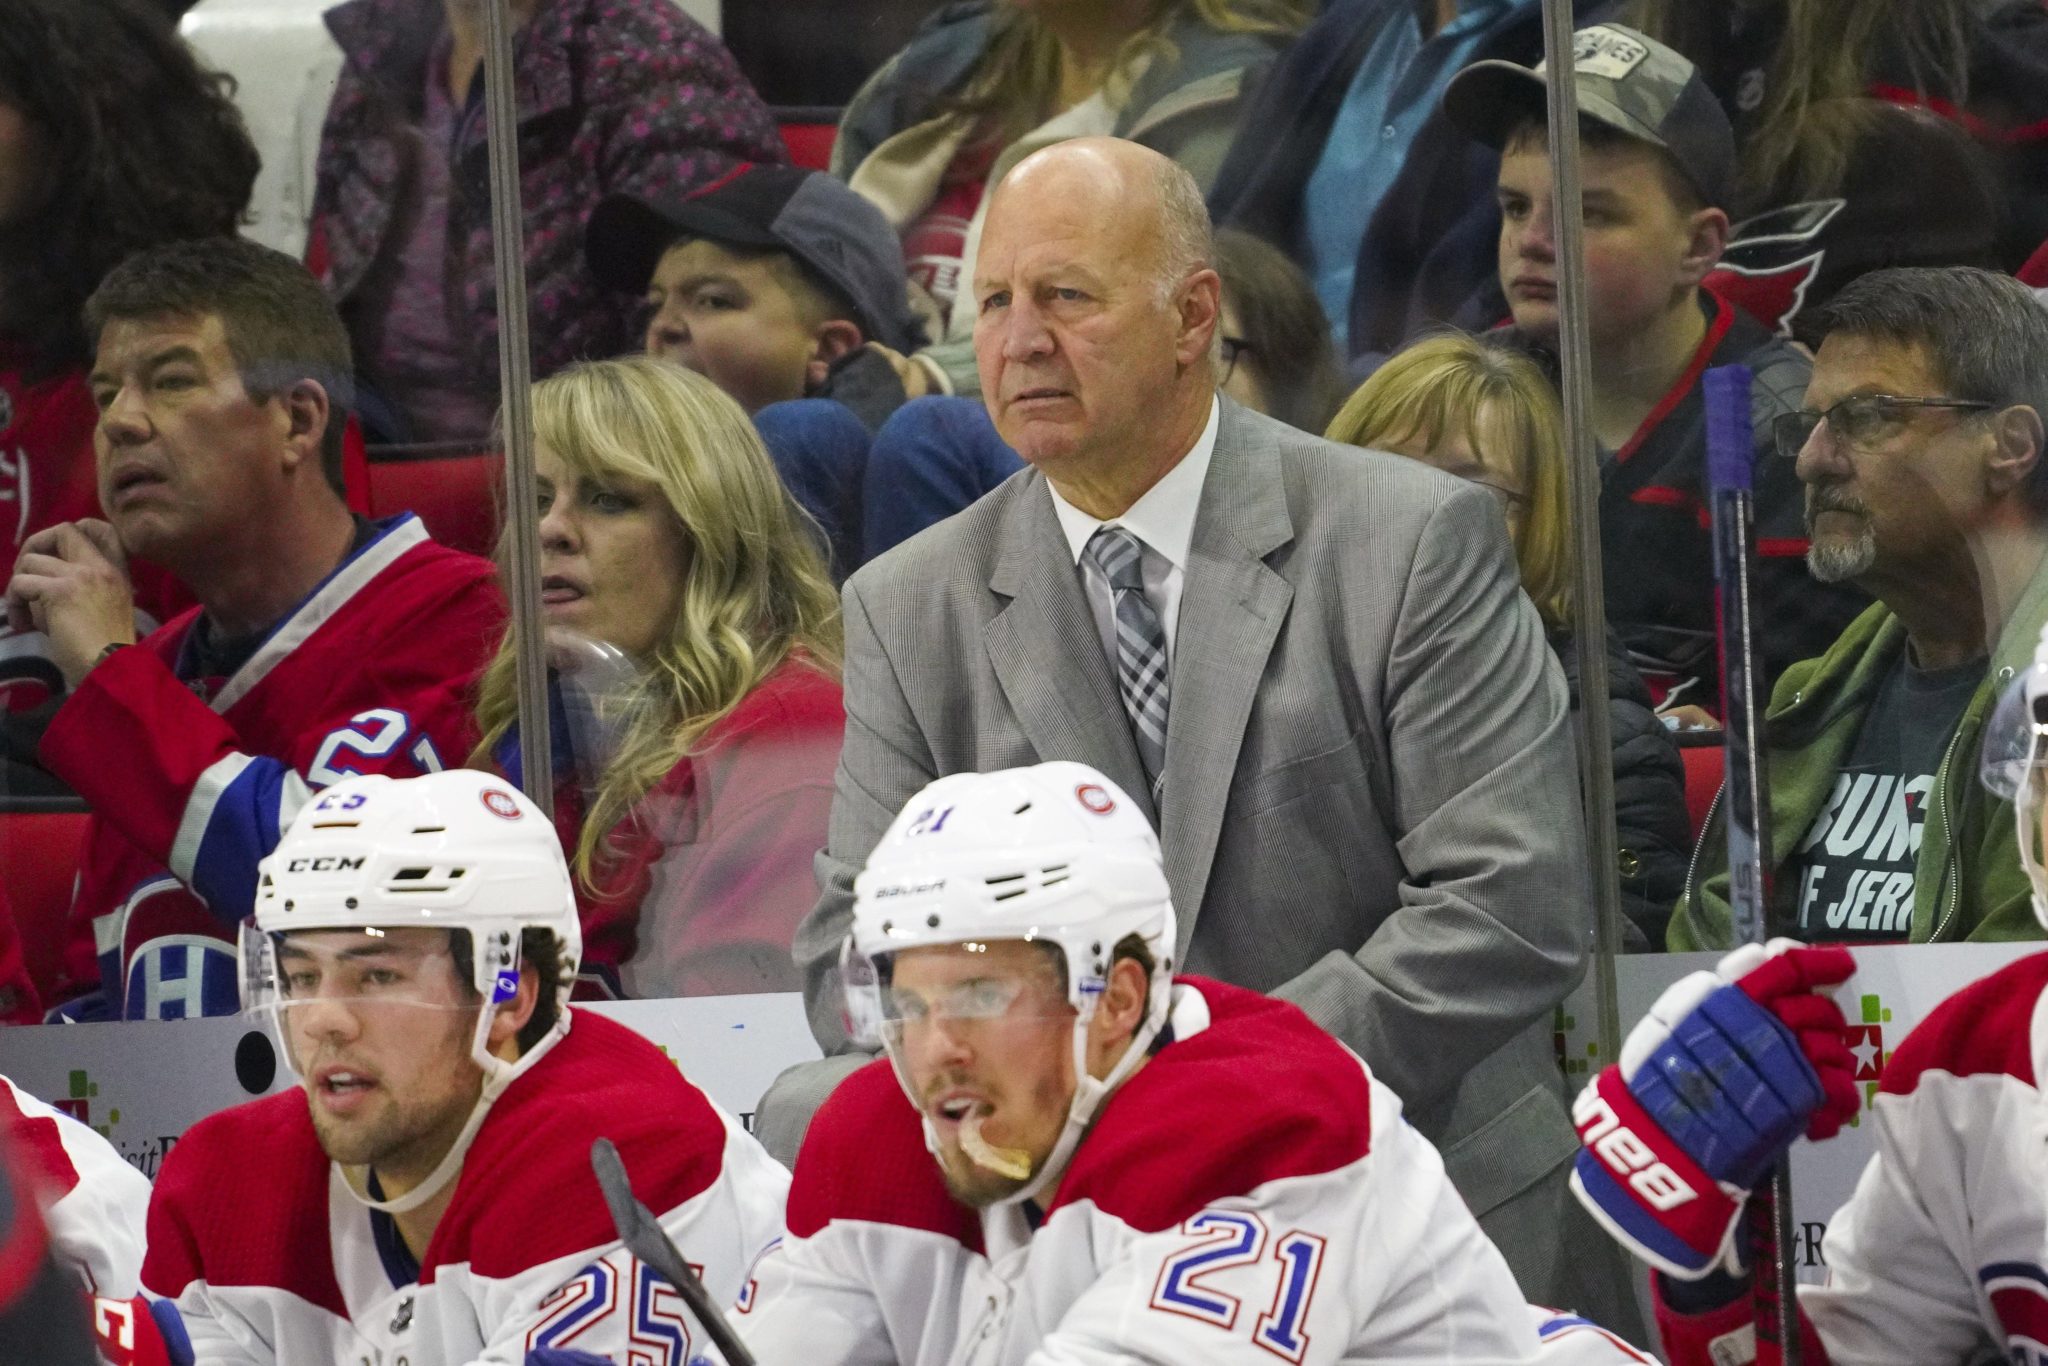 Canadiens Coach Claude Julien Hospitalized with Chest Pains, Unlikely to Coach Remainder of Series vs. Flyers